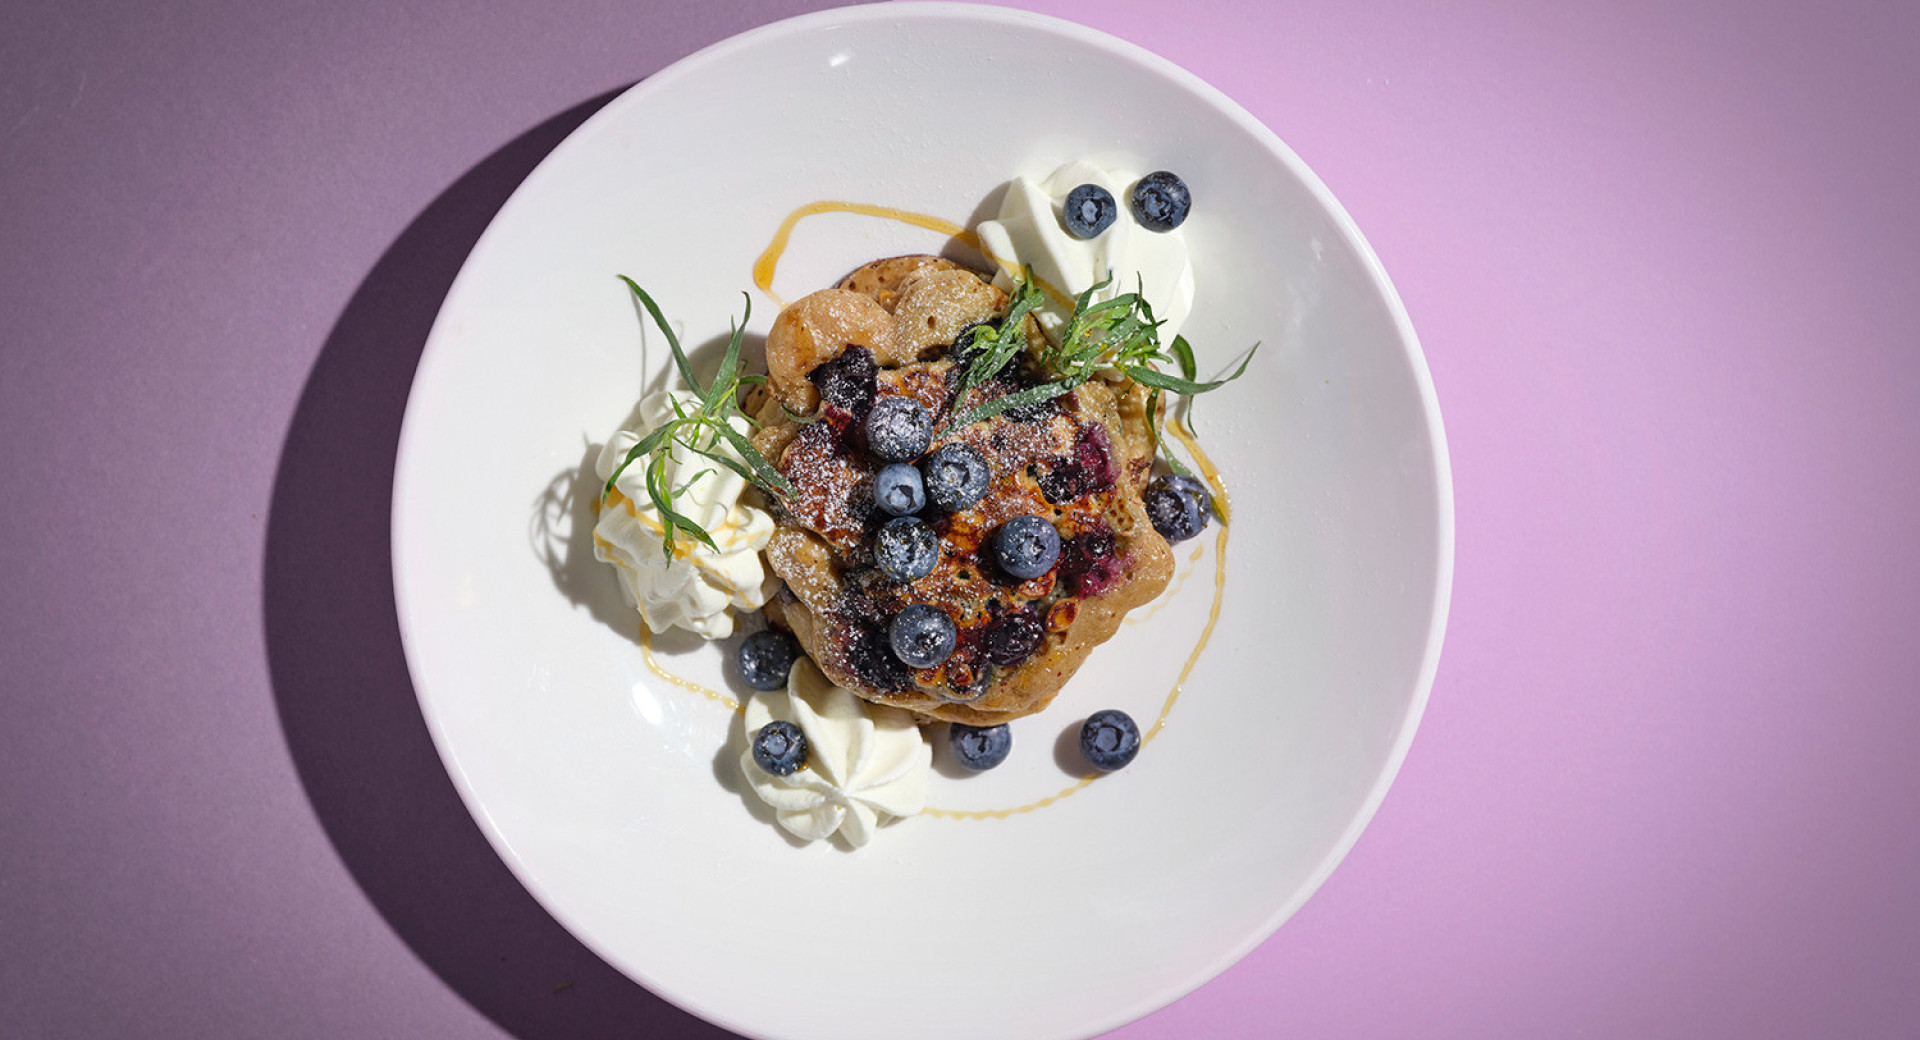 A white plate on a purple and pink base. On the plate, there is a pancake decorated with blueberries, dollops of cream, and sprigs of parsley.